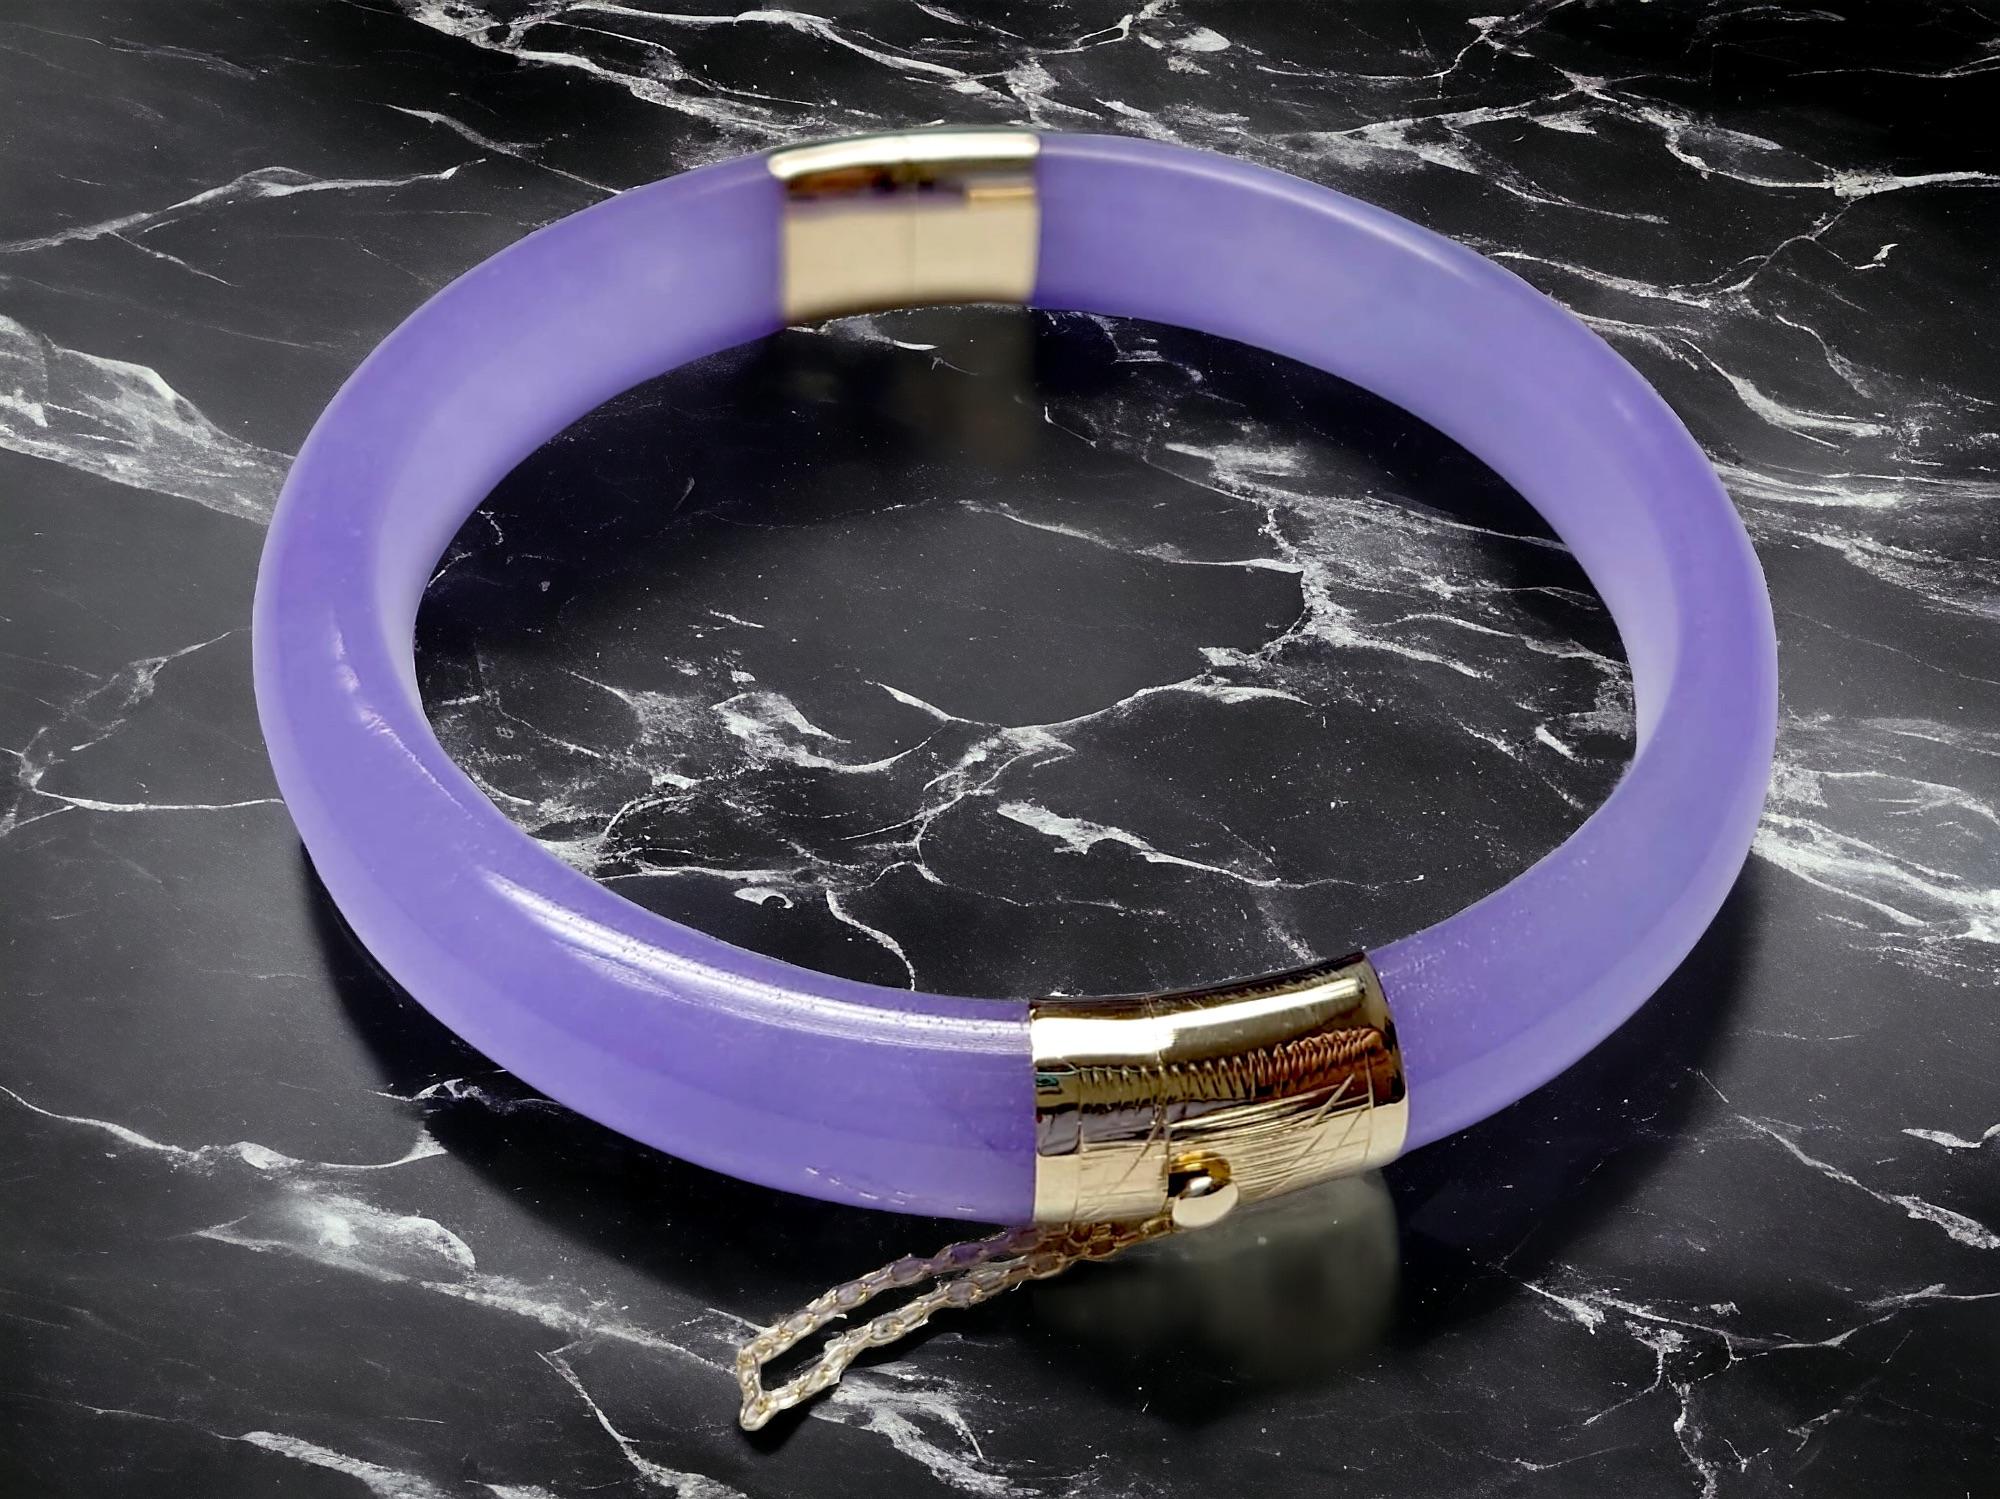 Viceroy's Circular Lavender Jade Bangle Bracelet (with 14K Yellow Gold) For Sale 10